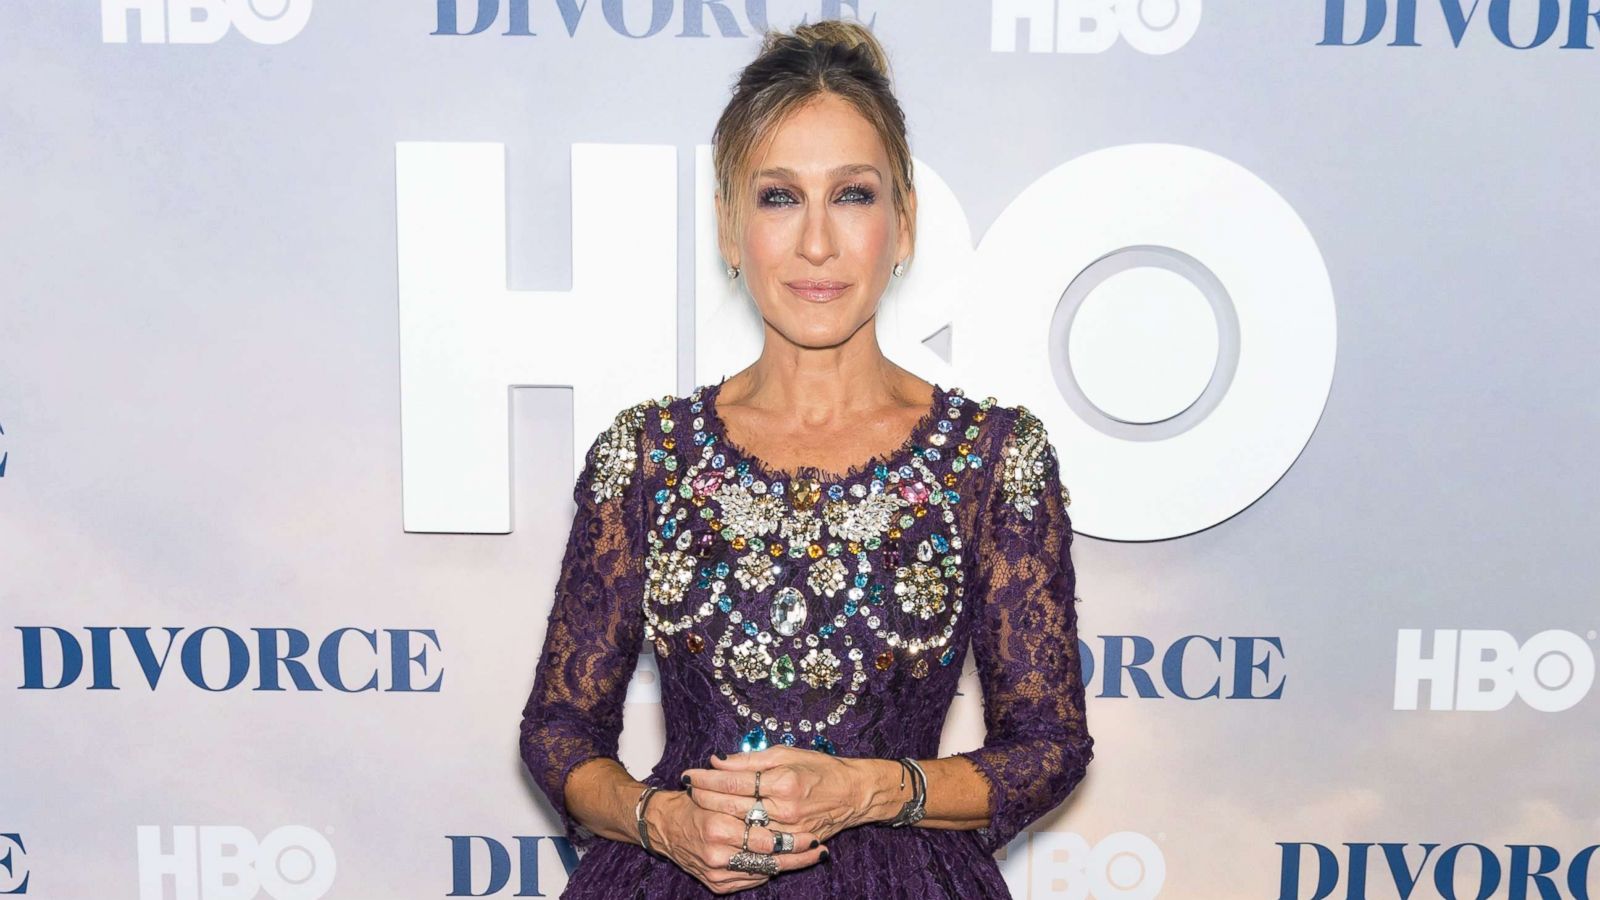 PHOTO: Actress Sarah Jessica Parker attends the 'Divorce' New York Premiere at SVA Theater, Oct. 4, 2016 in New York City.